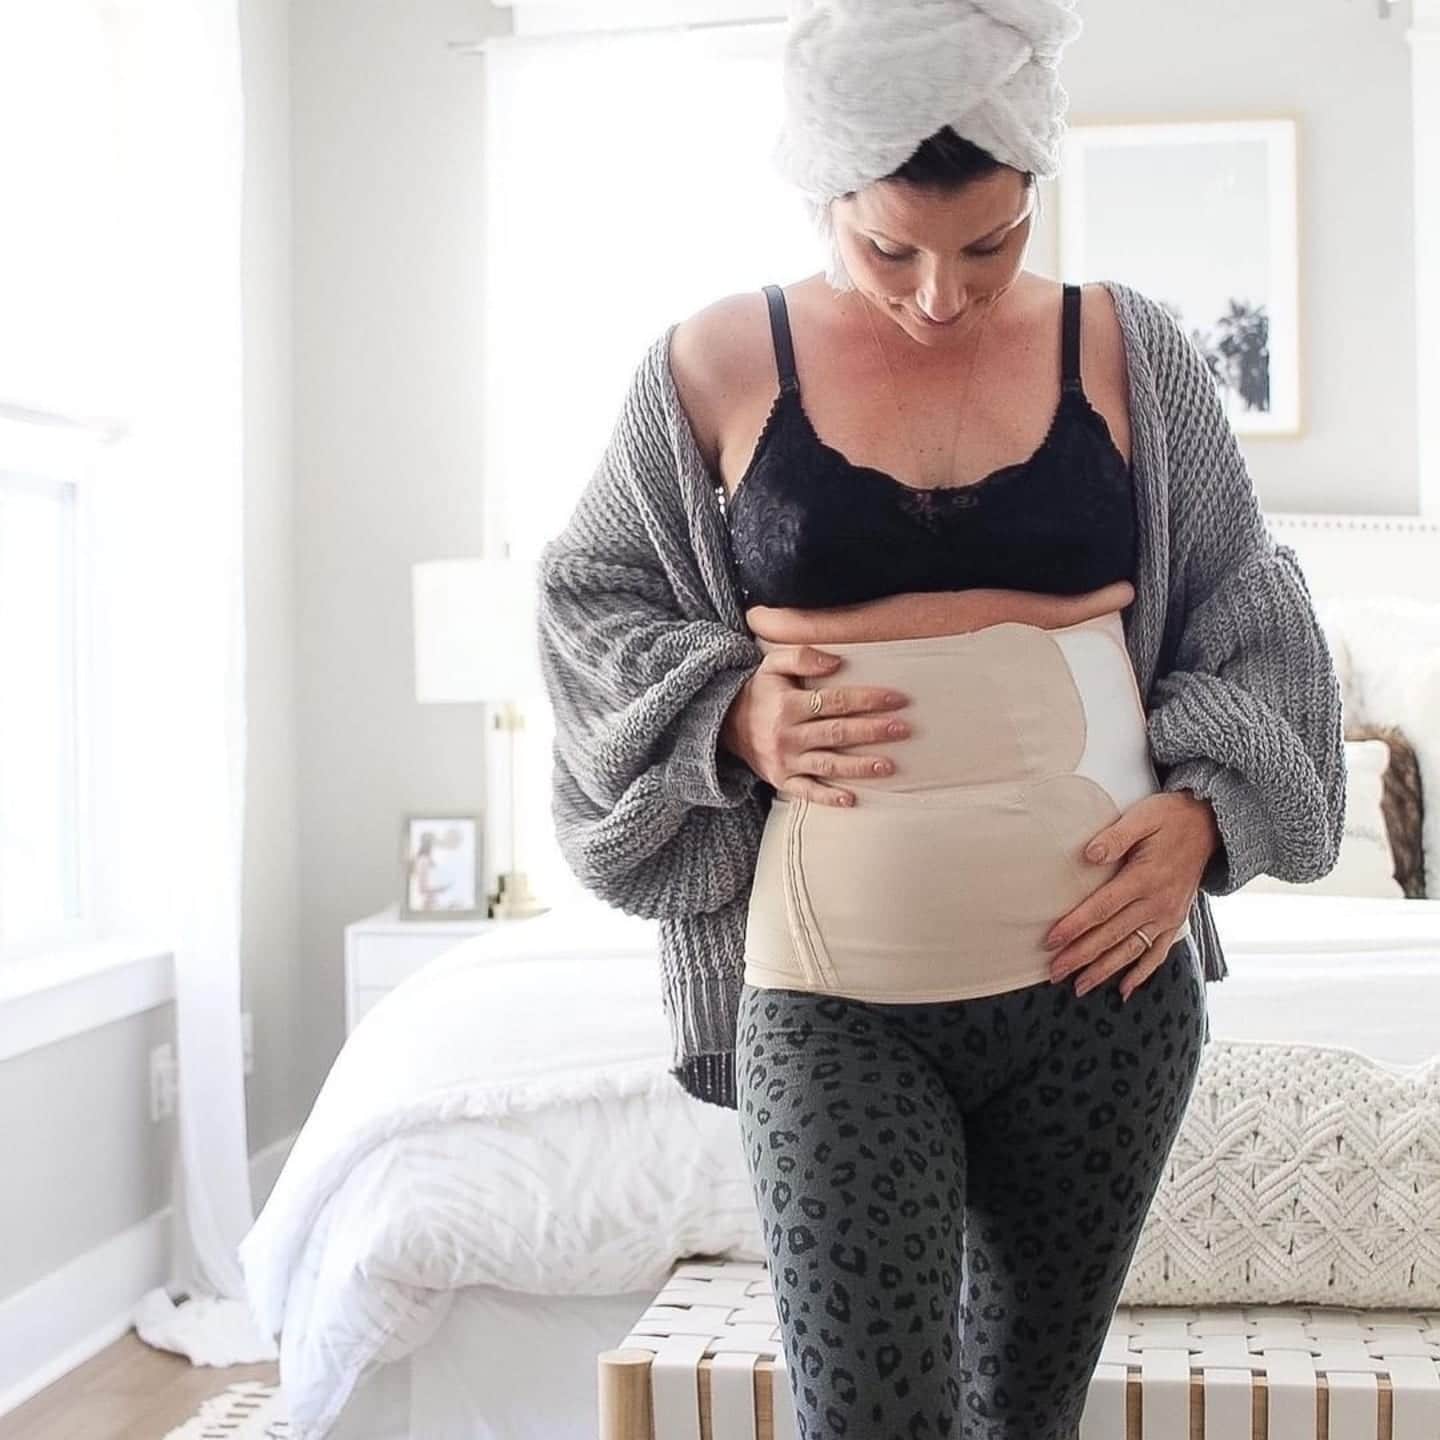 sponsored These maternity bump support leggings from Belly Bandit are